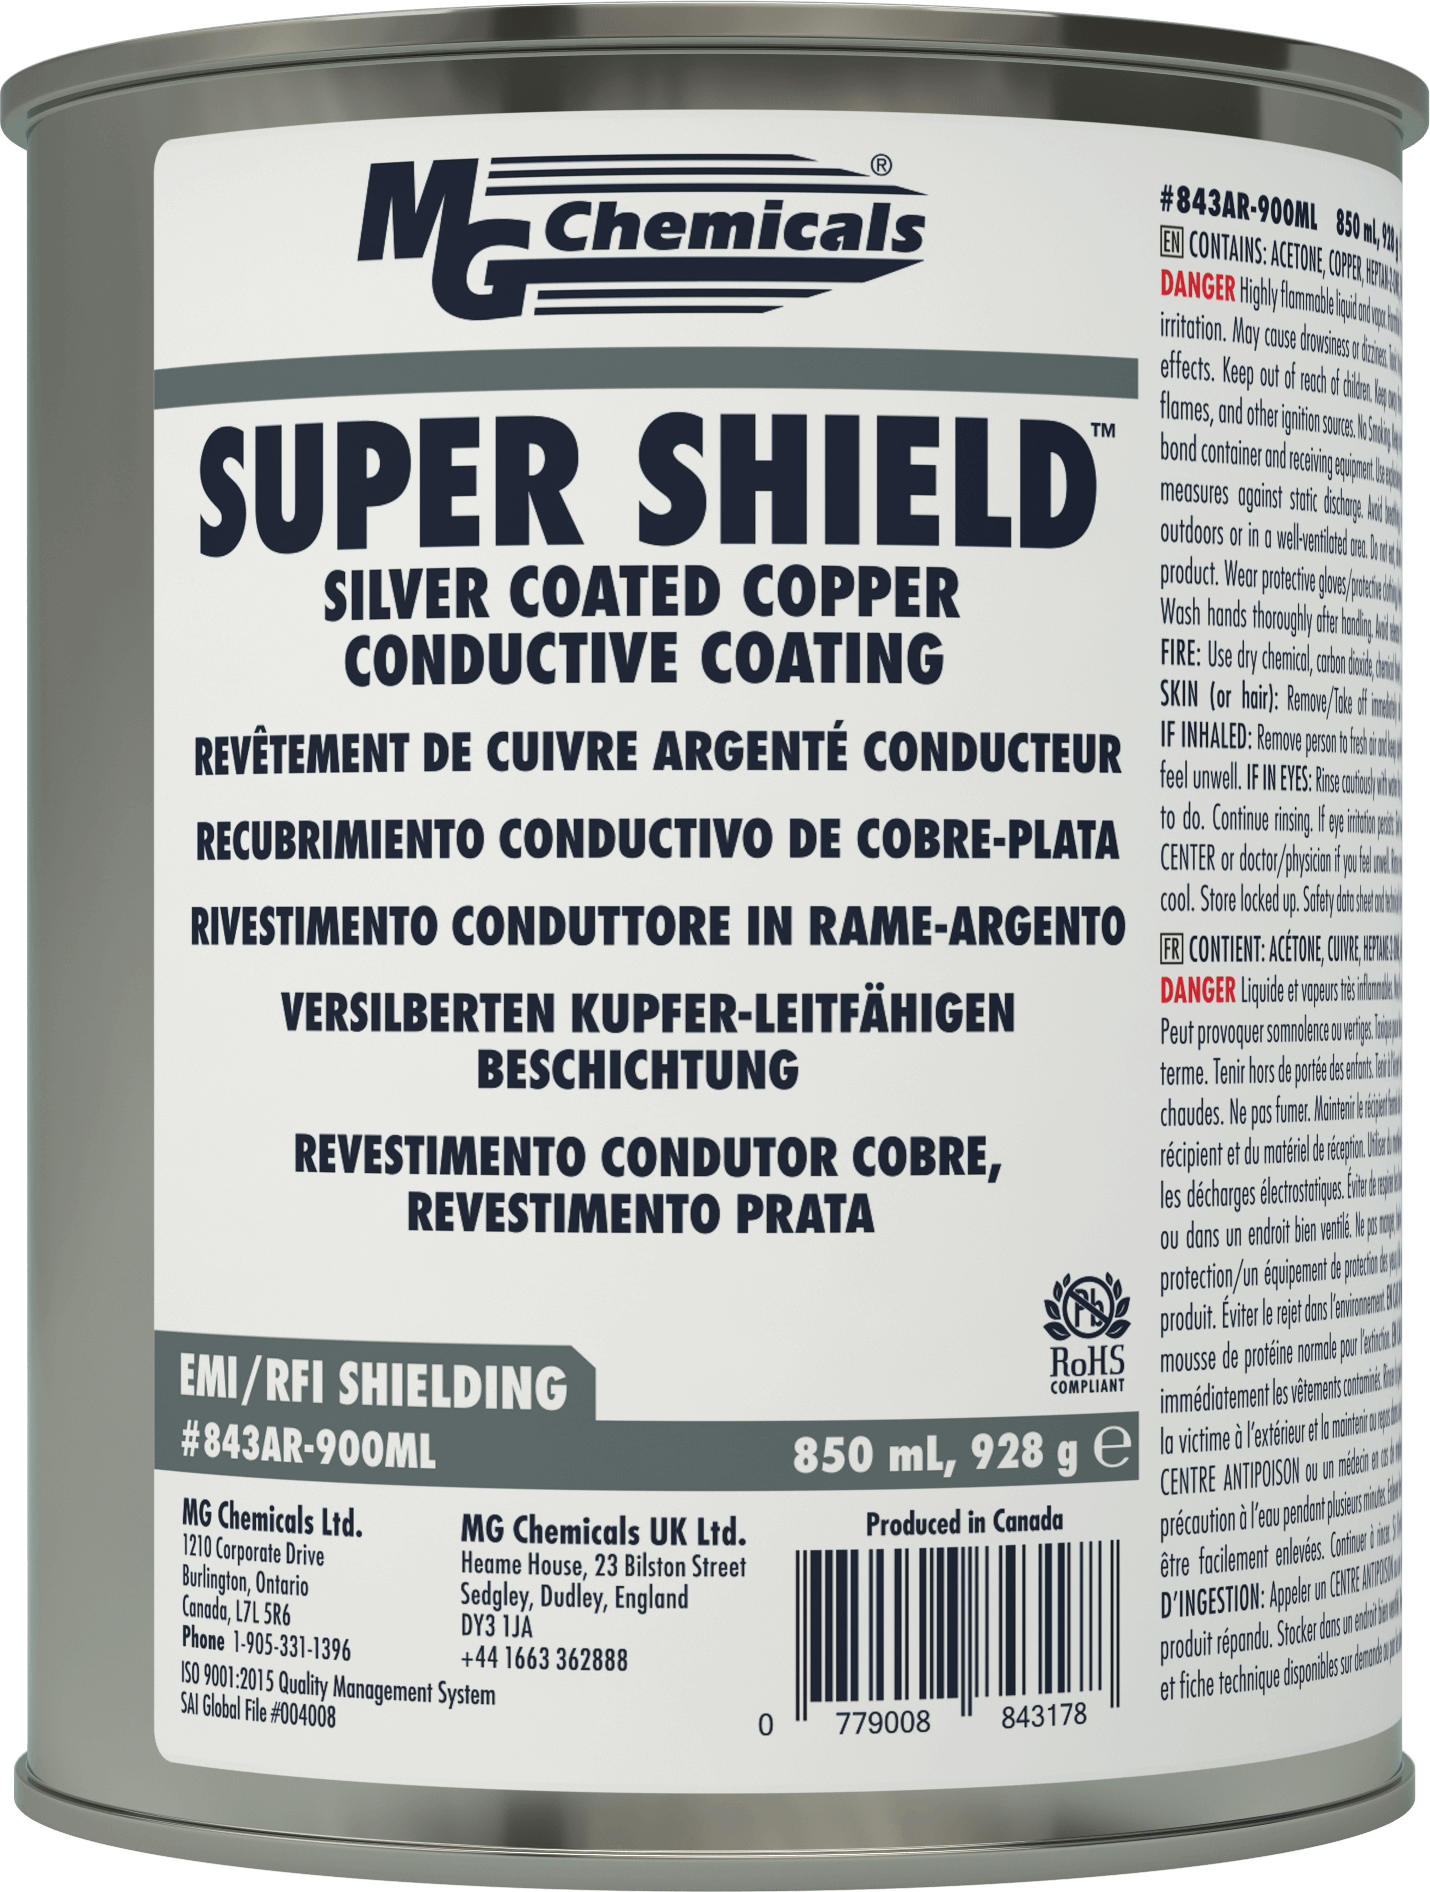 SUPER SHIELD Silver Coated Copper Conductive Coating - UL Recognized (Pre-diluted)